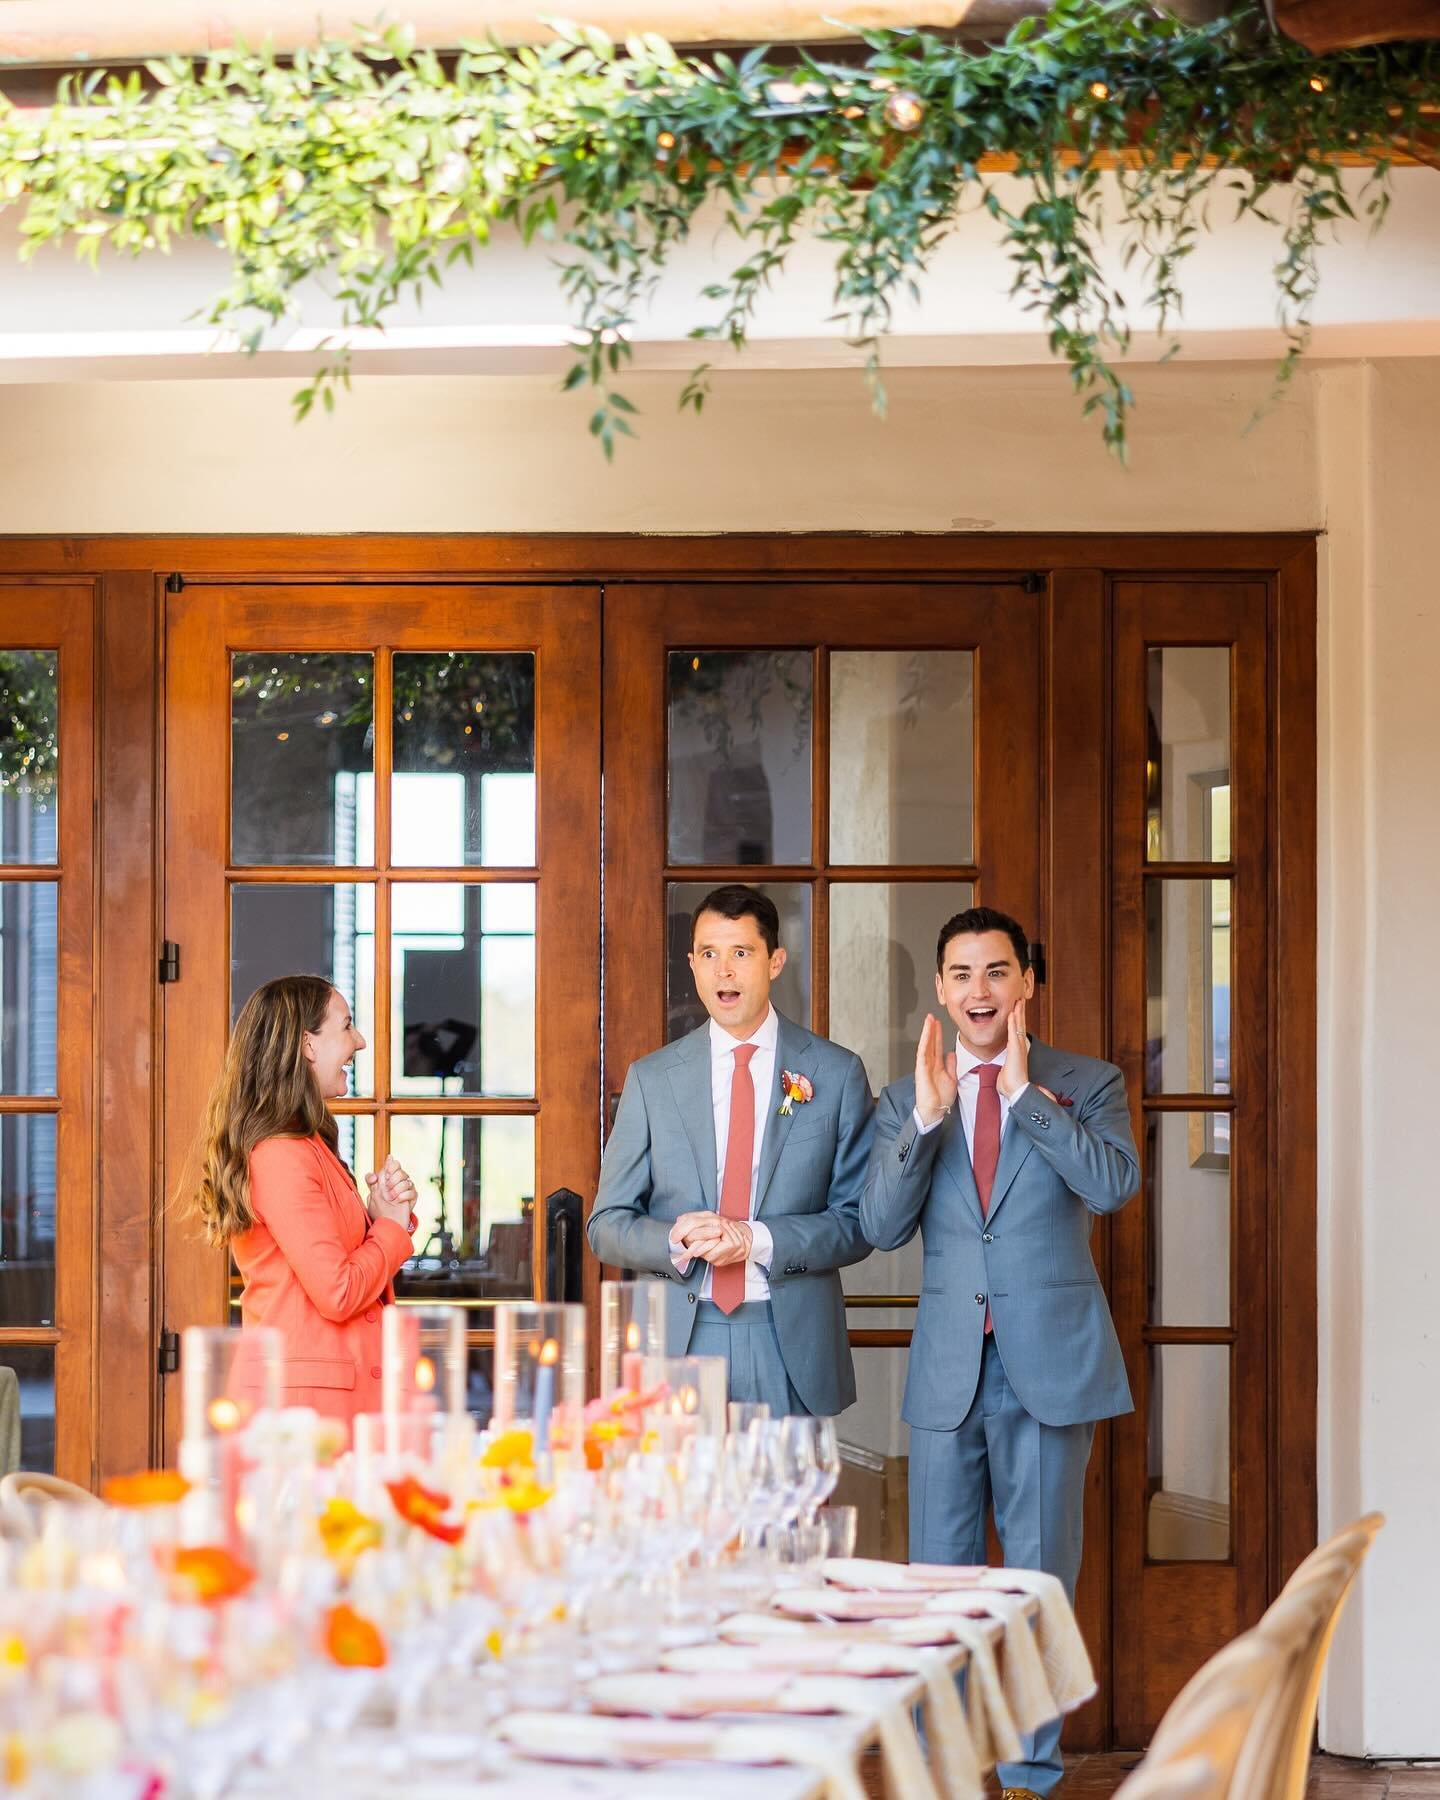 Happy anniversary to these two cuties who had THE BEST reactions to their reception reveal! ❤️🧡💛This moment is what we wedding pros live for! 
.
.
.
Planning &amp; Design: @janealexandraevents &amp; @crystal.janealexandraevents
Venue: @ritzcarltonb